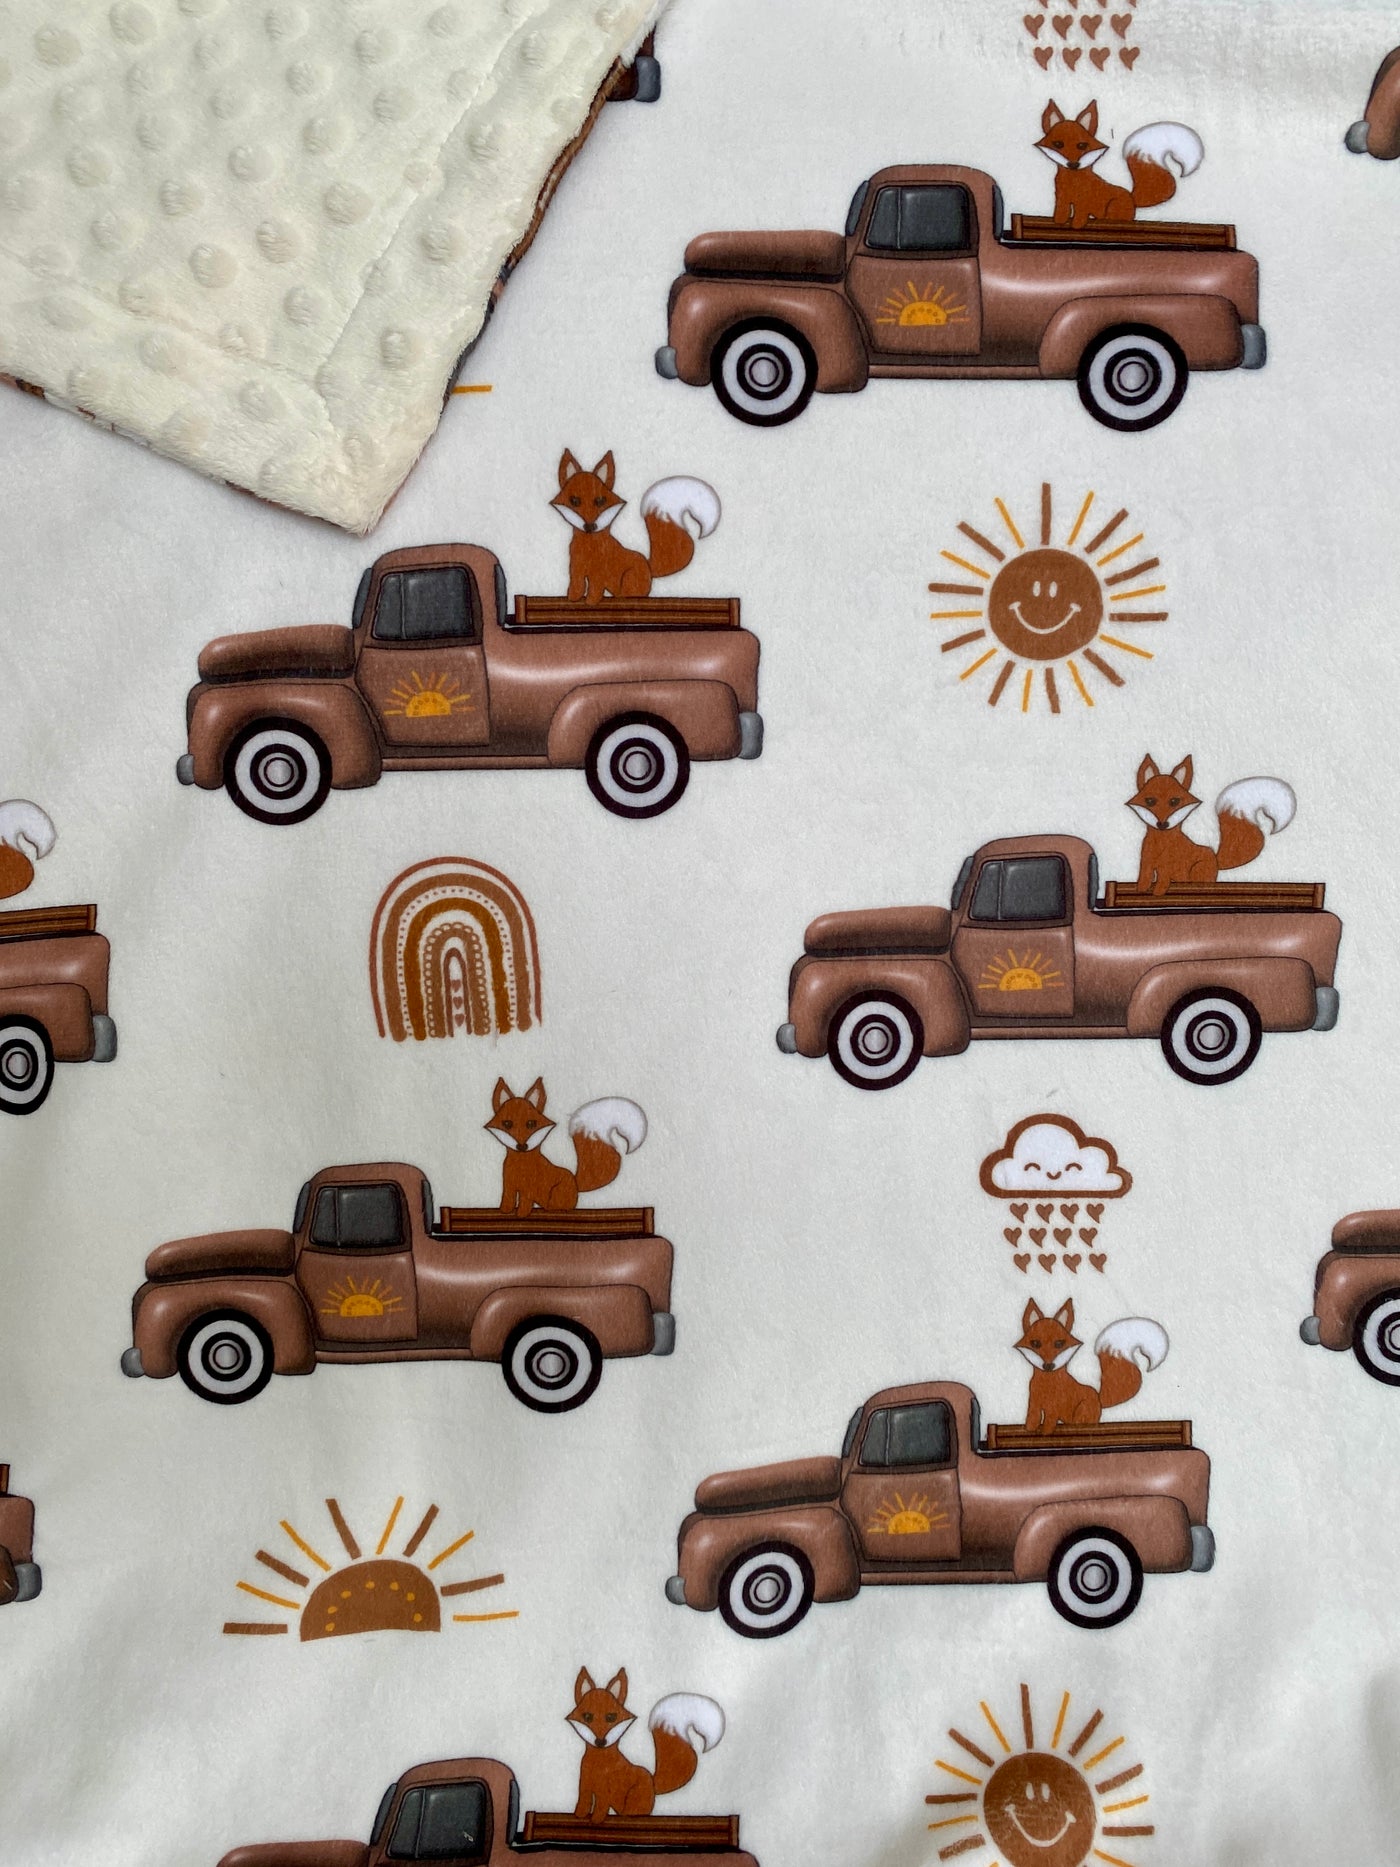 Giant Blanket: Vintage Trucks and Foxes